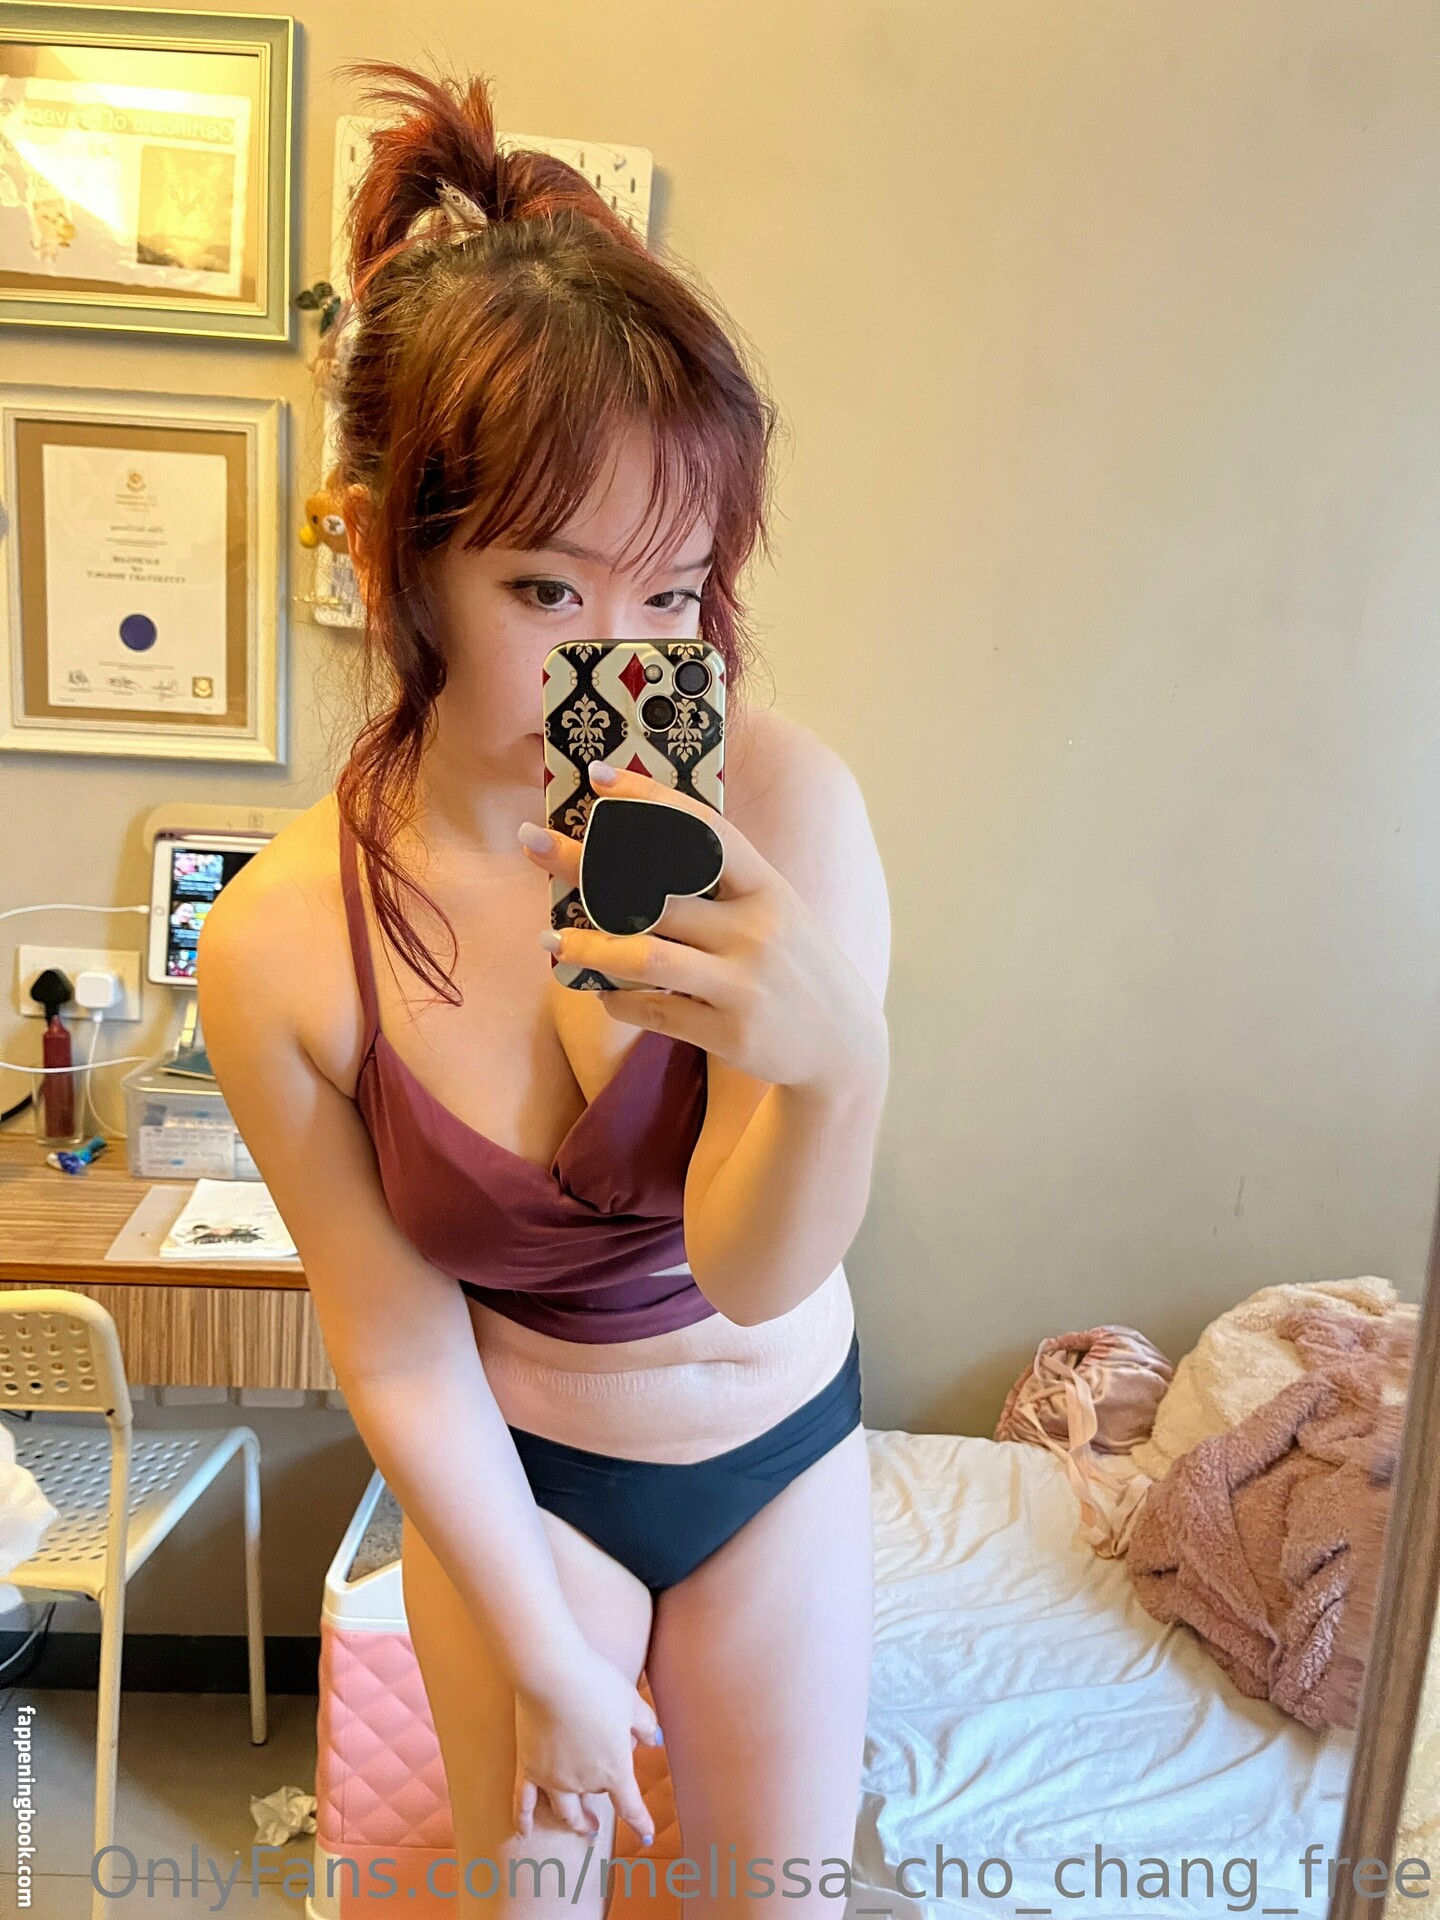 melissa_cho_chang_free Nude OnlyFans Leaks